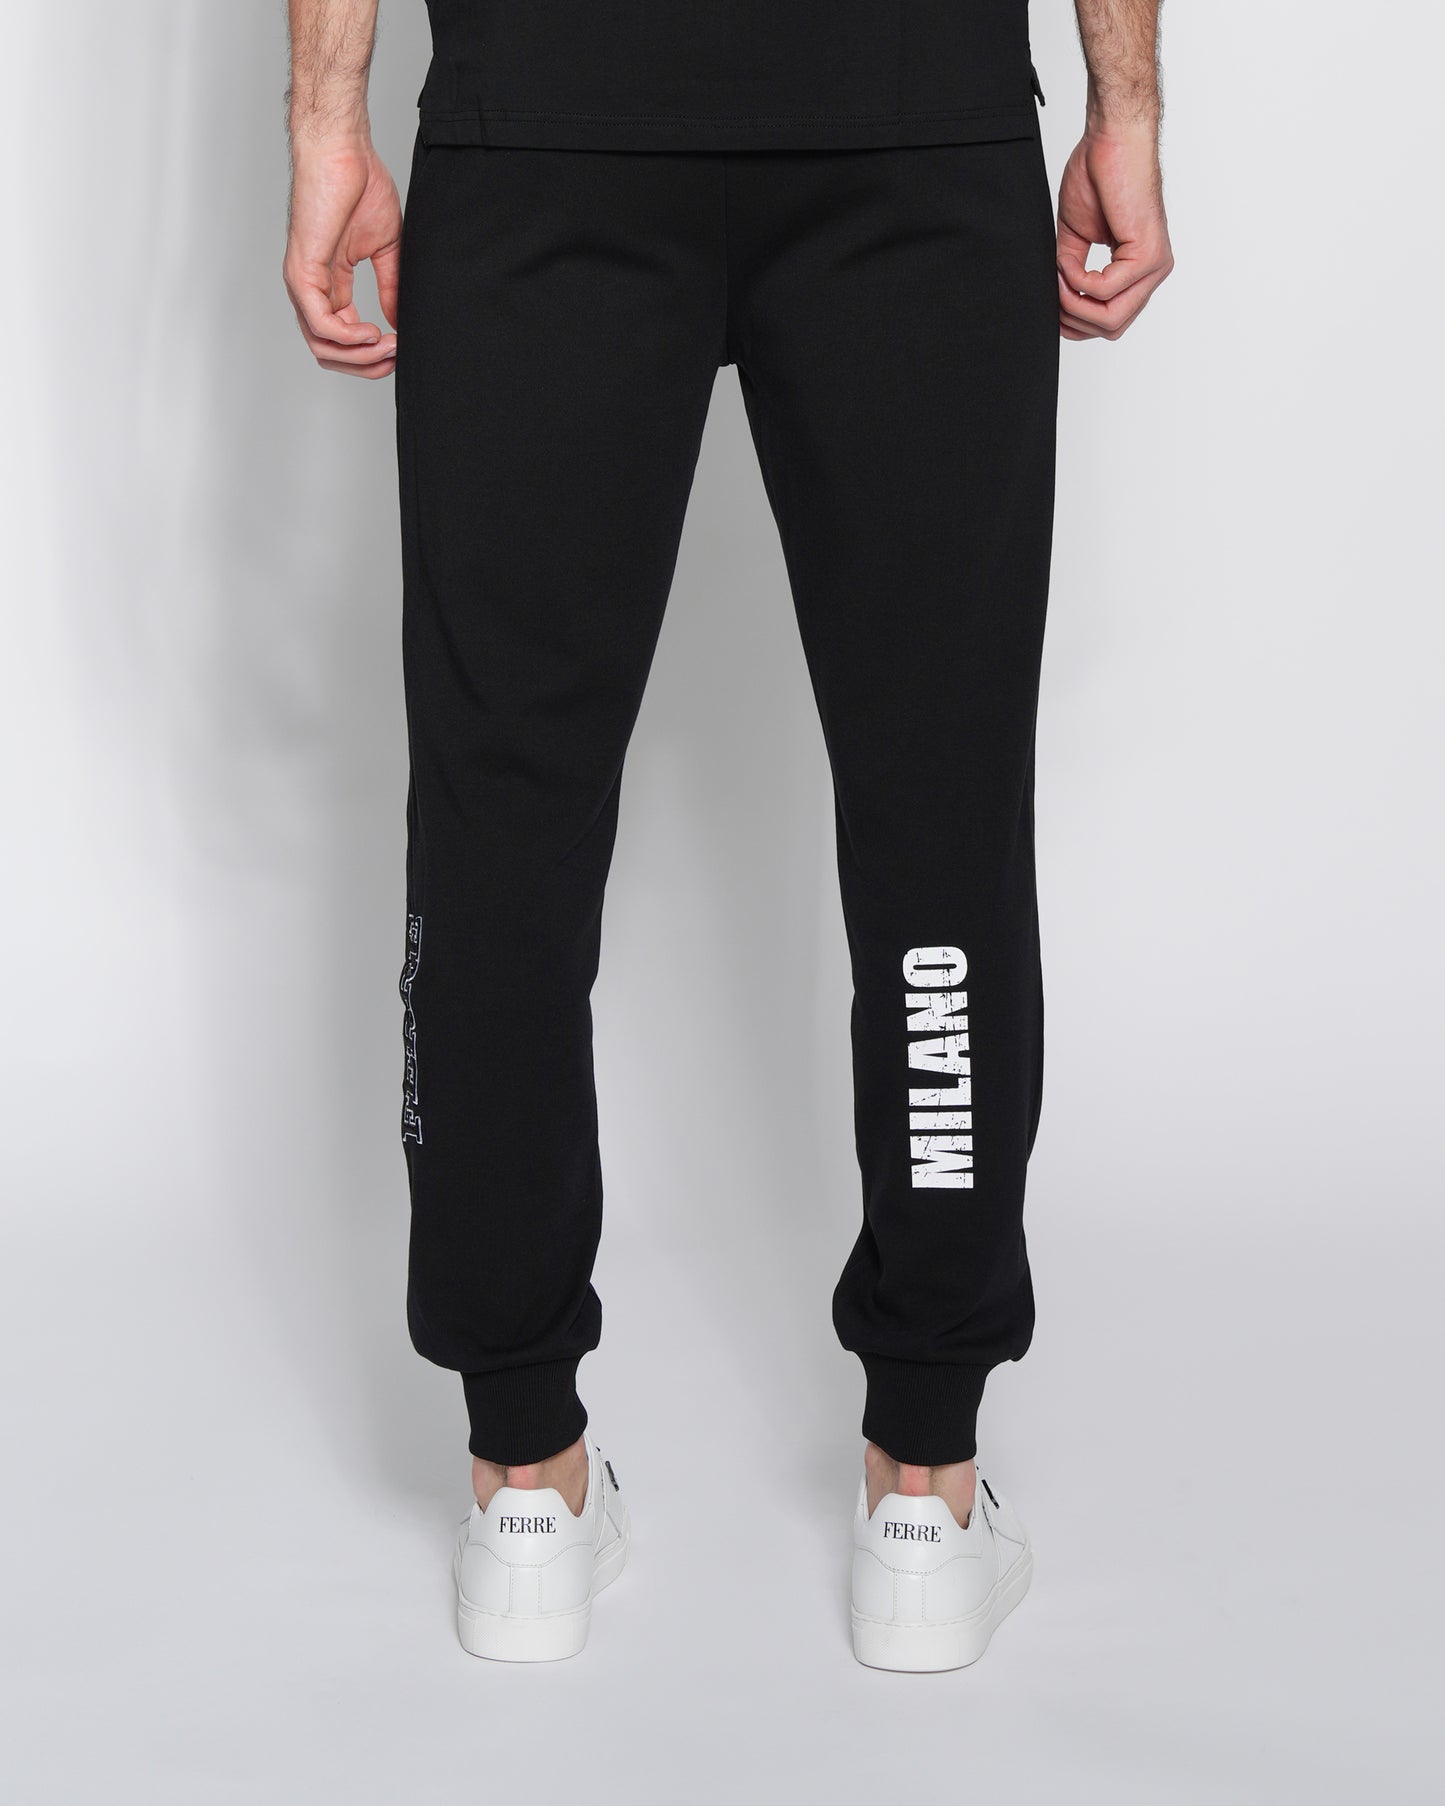 Embroidered and Printed Logo Track Pants